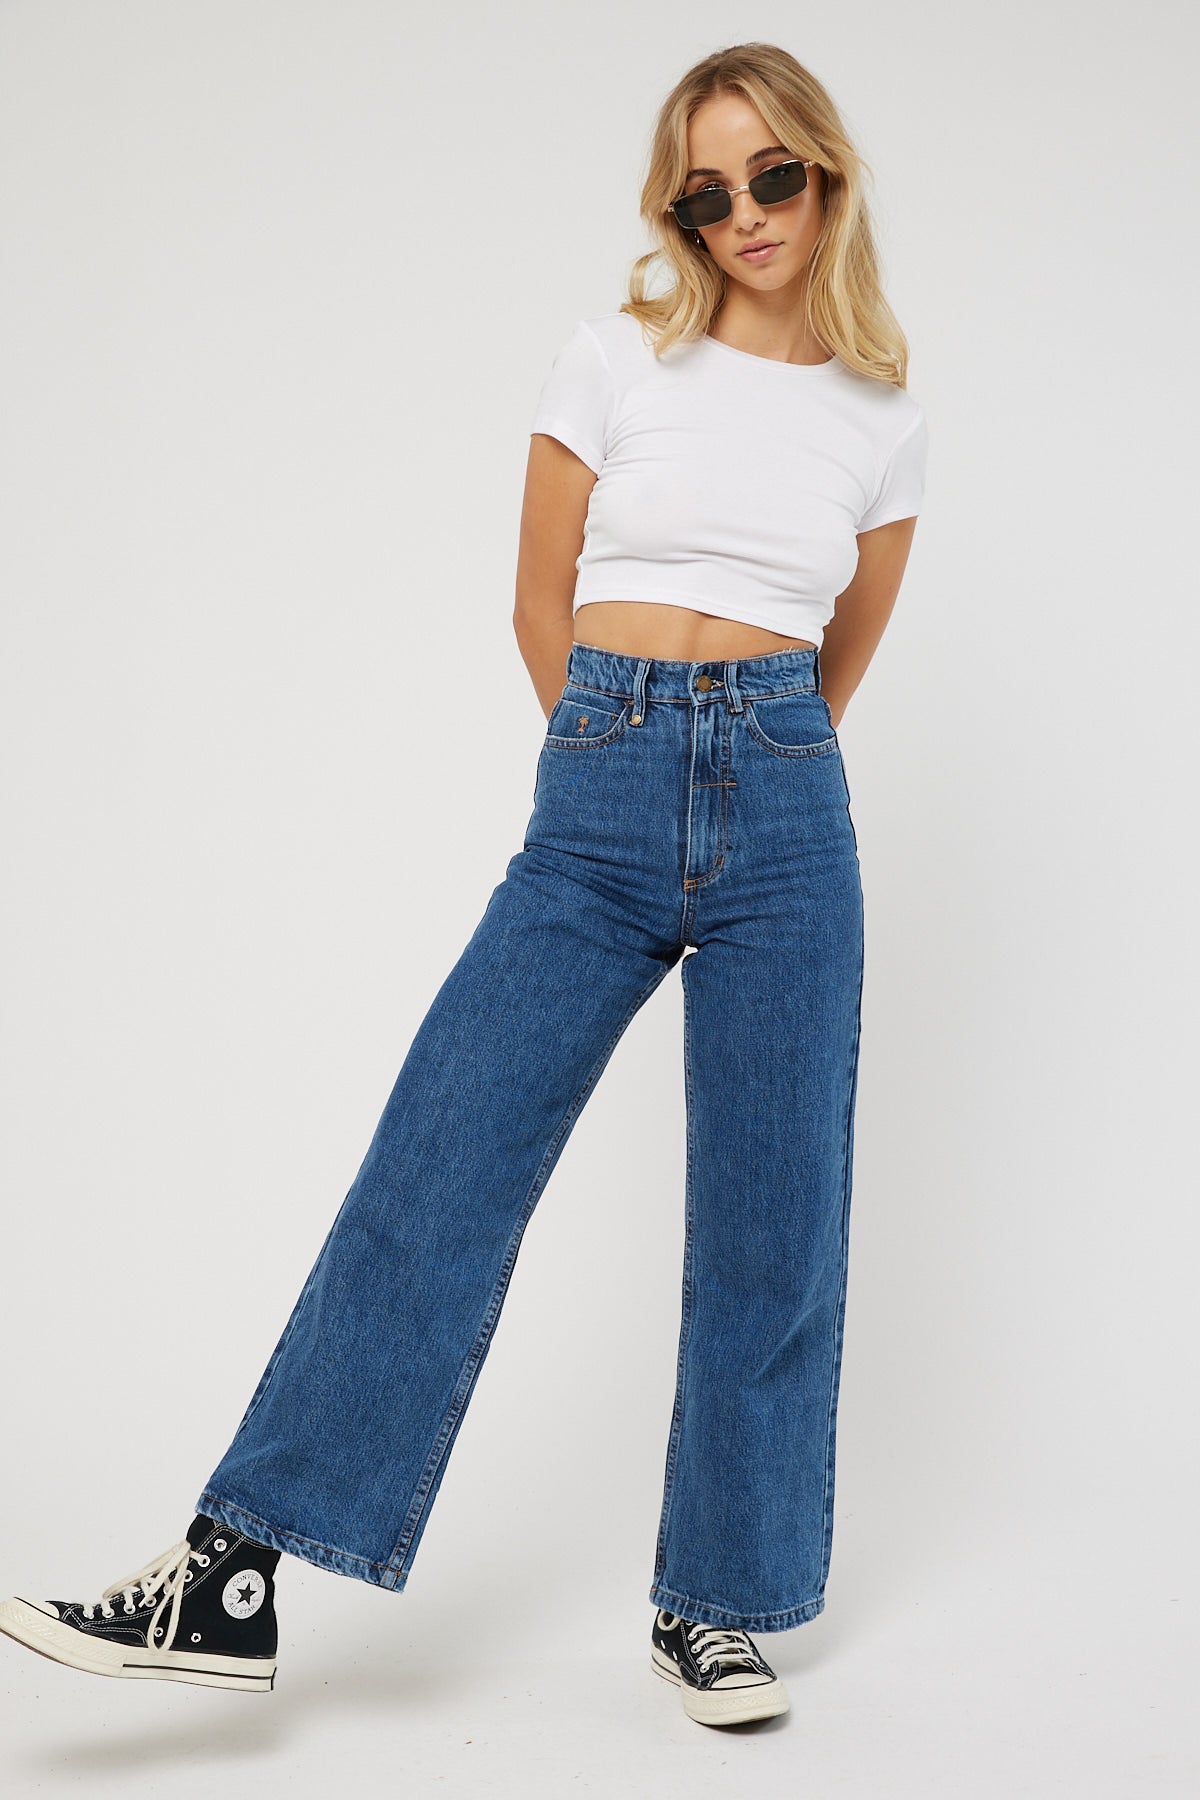 Thrills Holly Jean Rinsed Blue – Universal Store